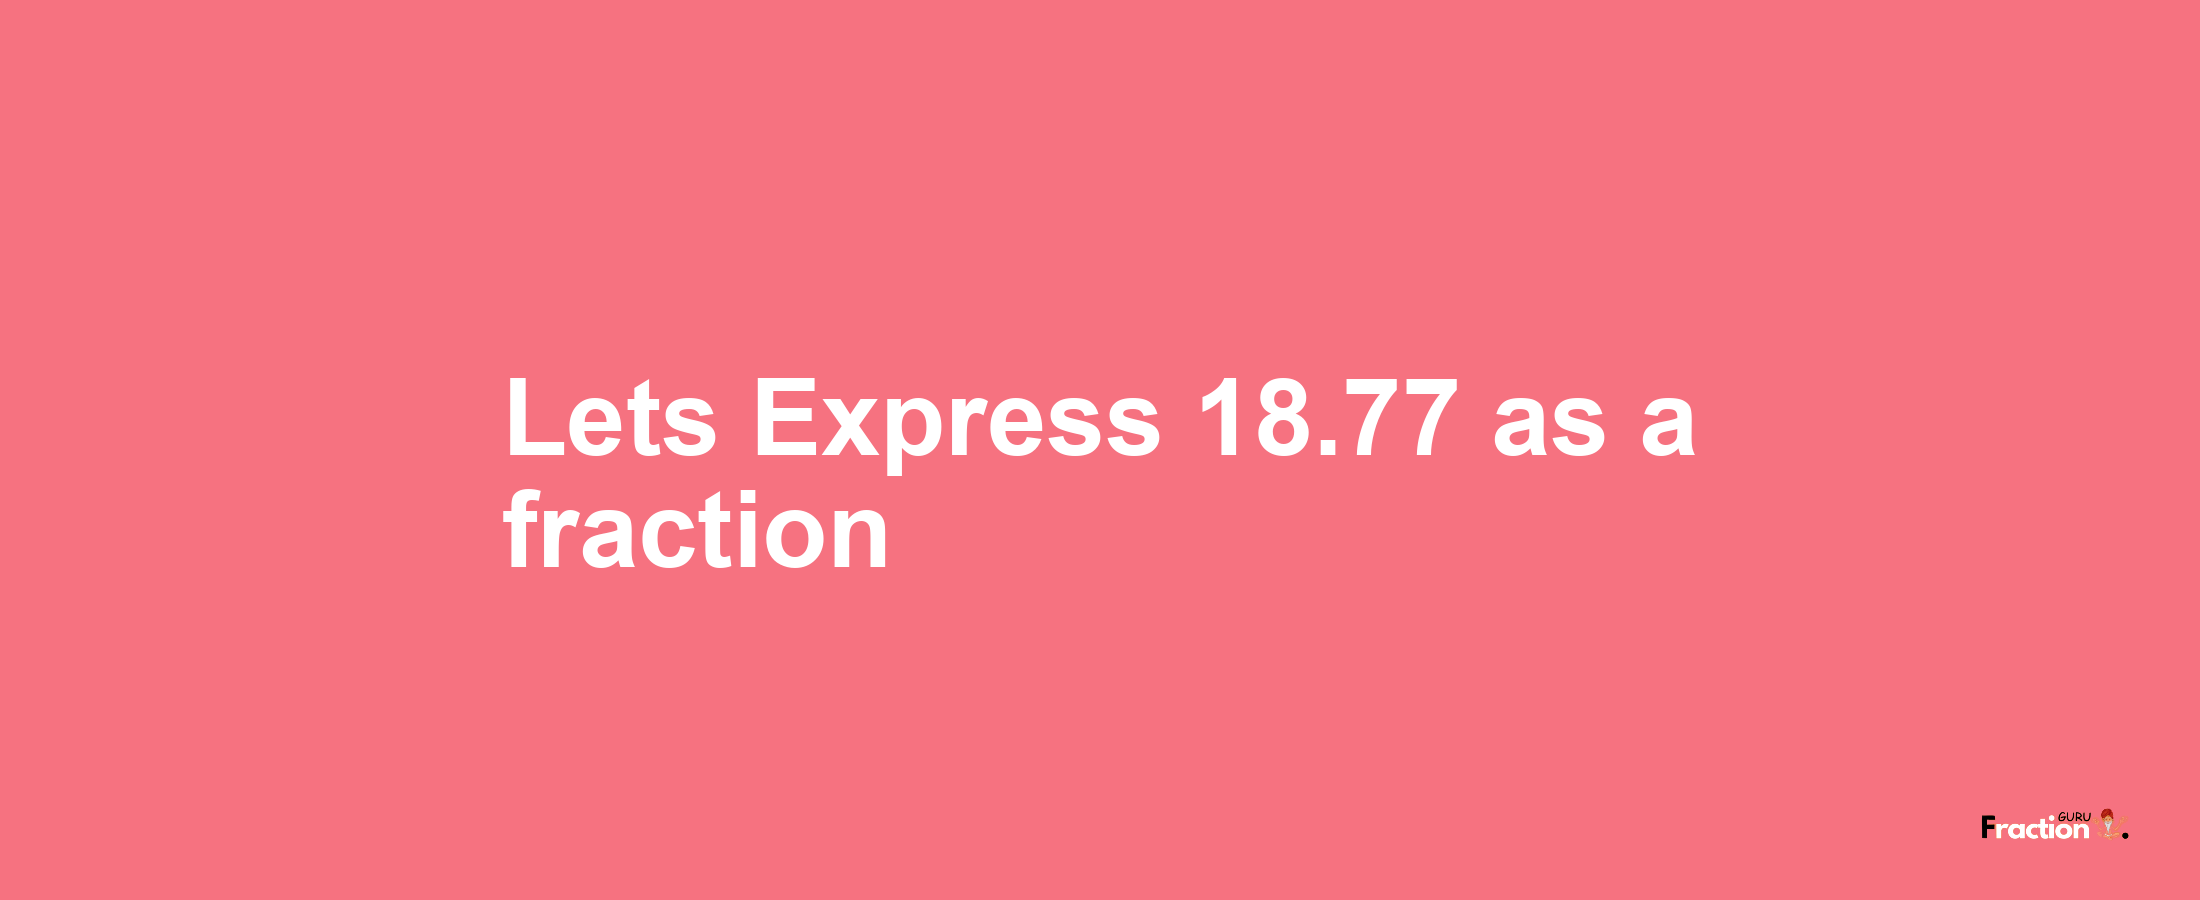 Lets Express 18.77 as afraction